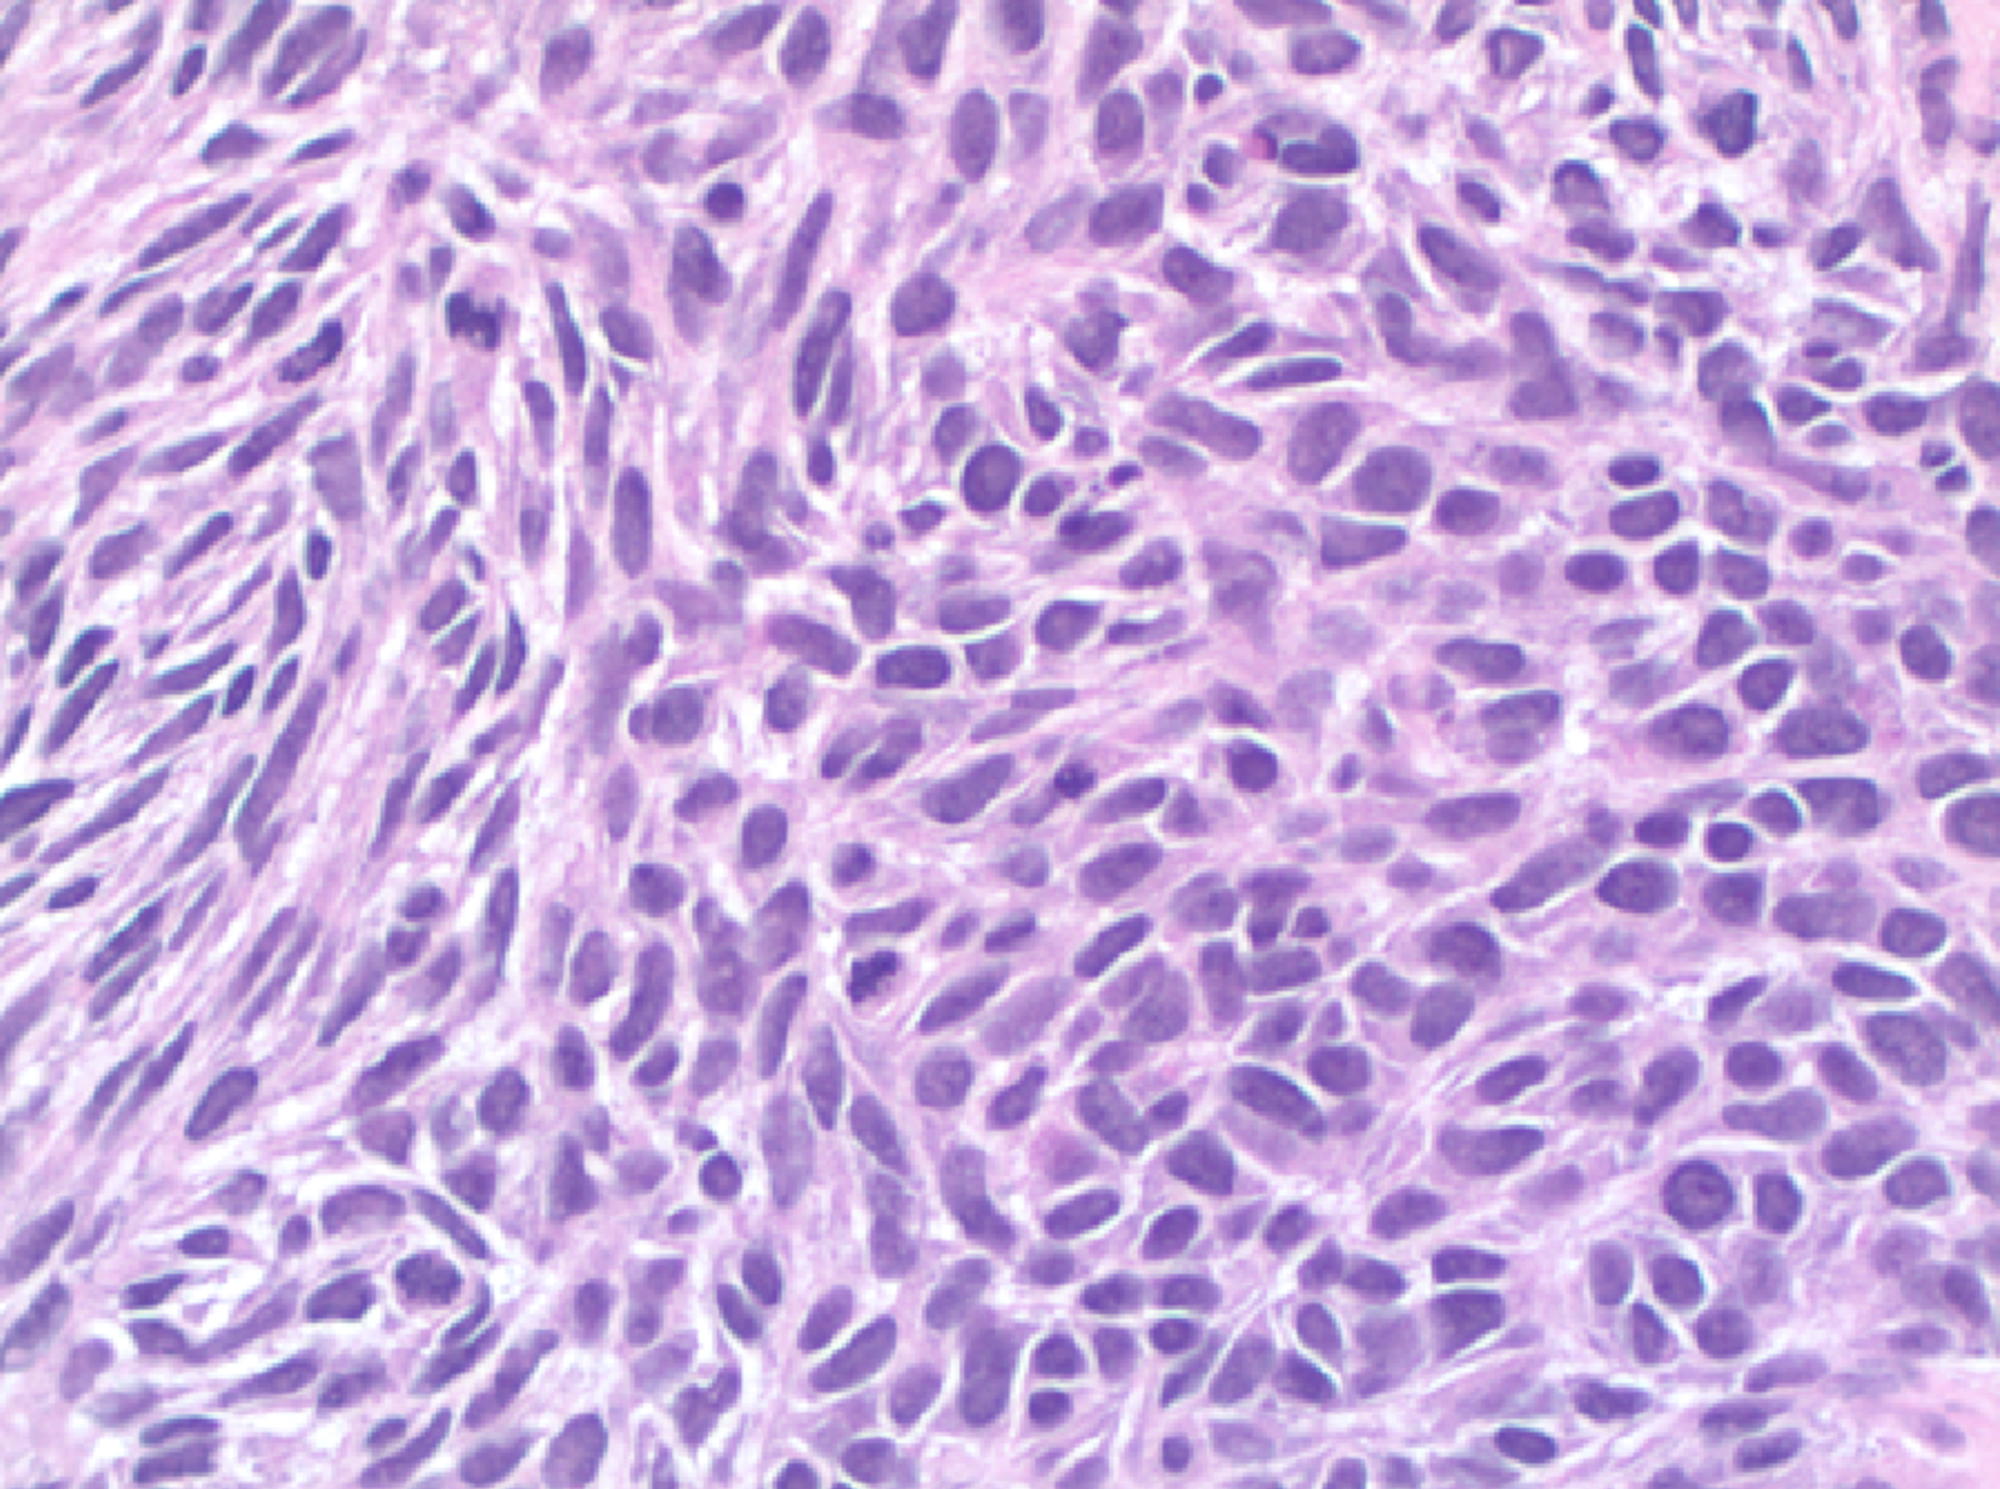 spindle cell carcinoma